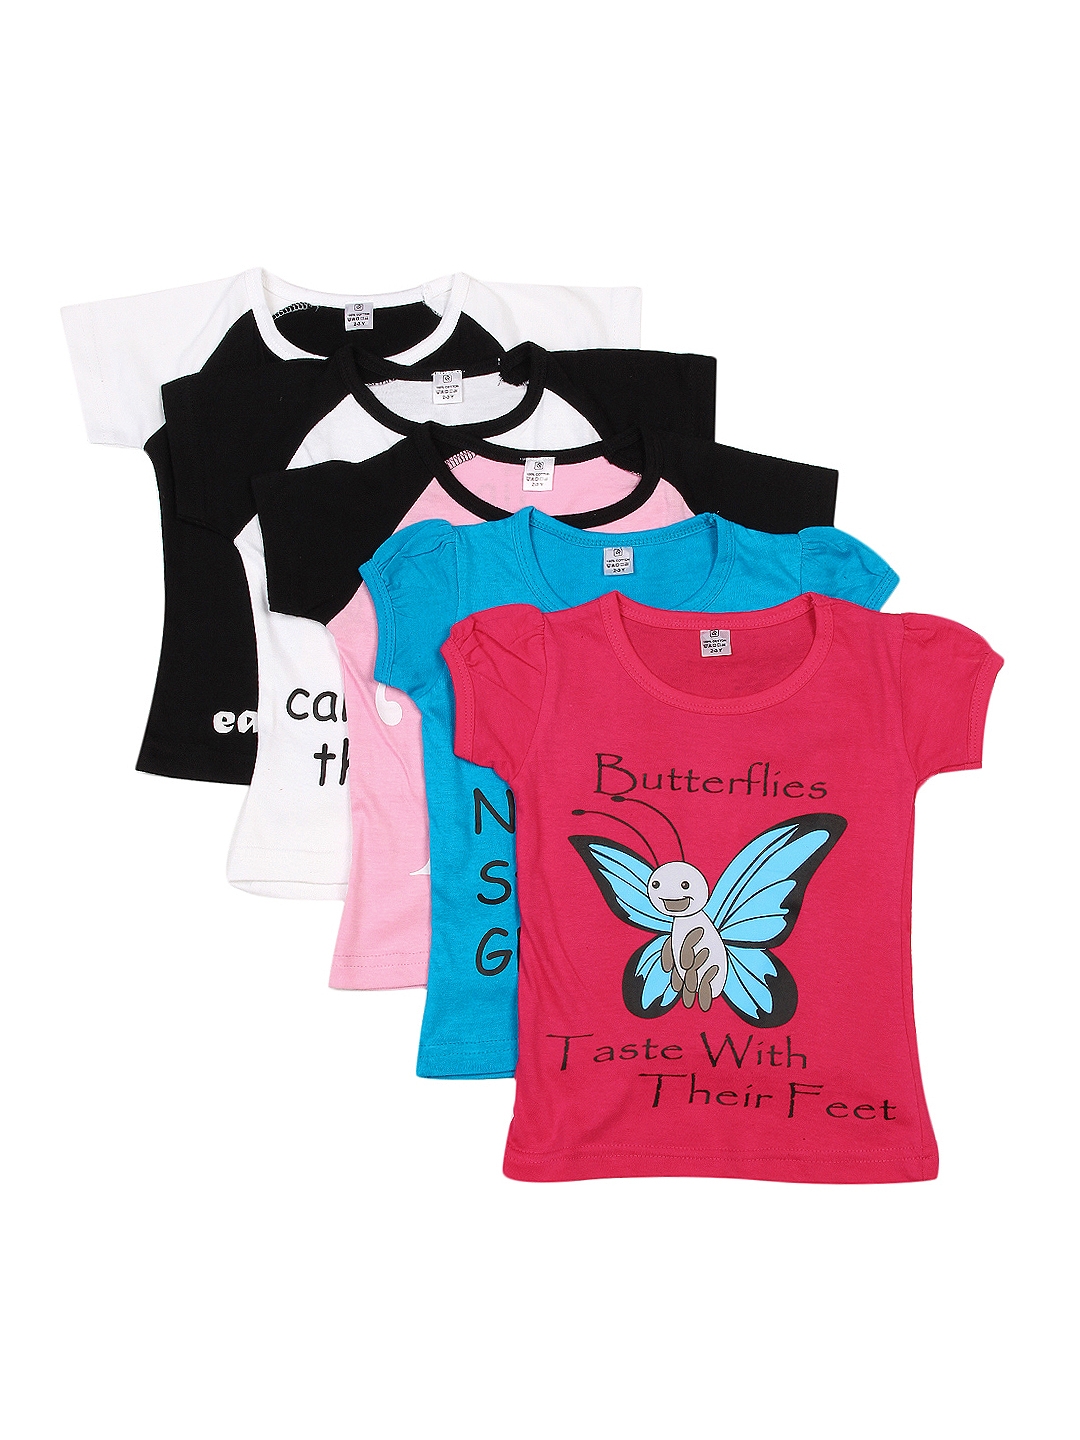 GKIDZ Girls Pack of 5 Printed Pure Cotton T shirts